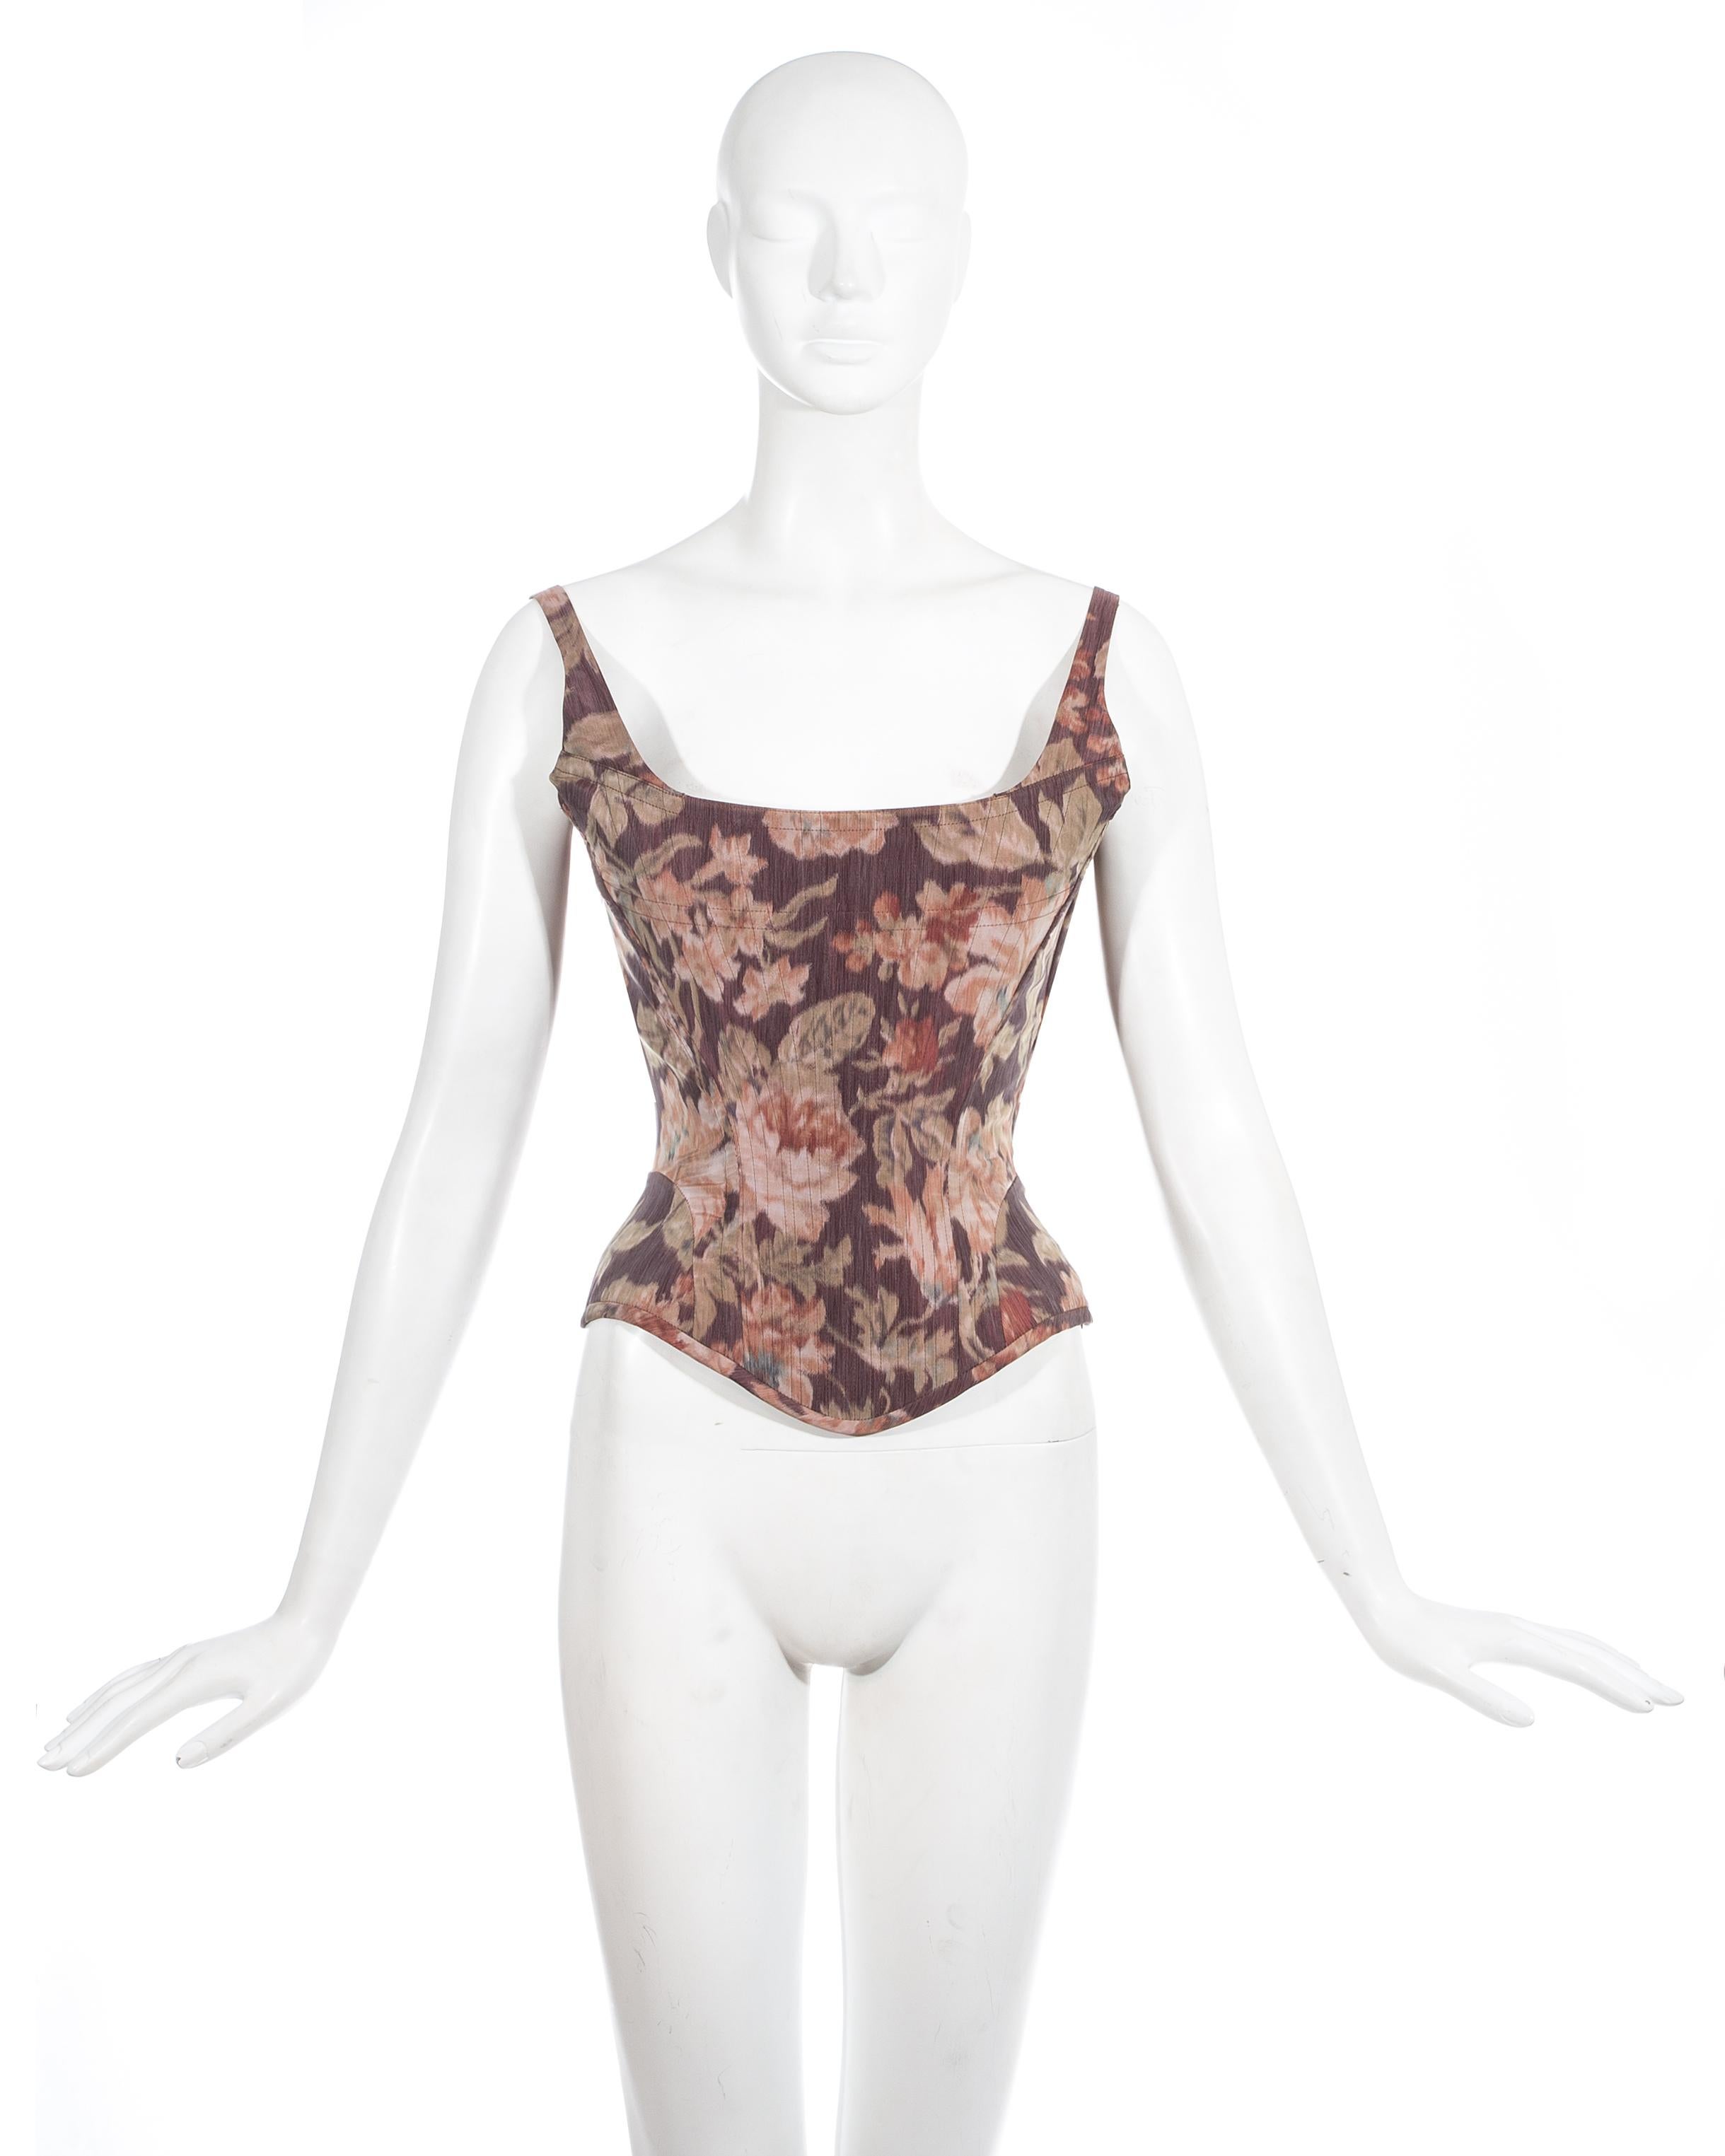 Vivienne Westwood; couture pink floral silk taffeta evening corset with lace up fastening at the rear, internal boning and hidden side zip closure. Designed to chinch the waist and push the breasts up.

Fall-Winter 1997